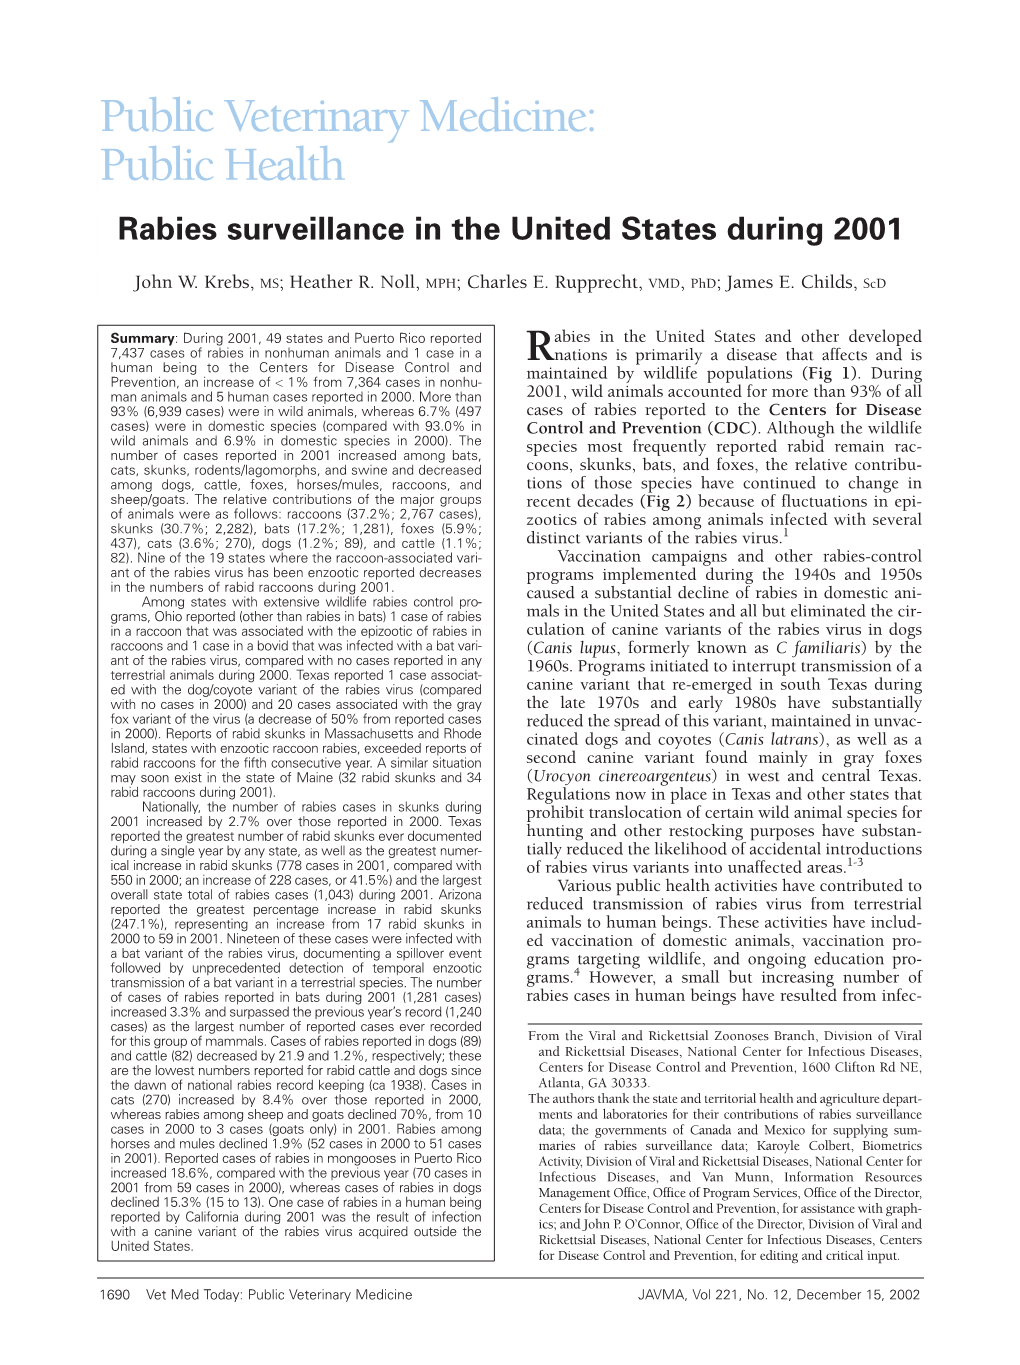 Public Veterinary Medicine: Public Health Rabies Surveillance in the United States During 2001